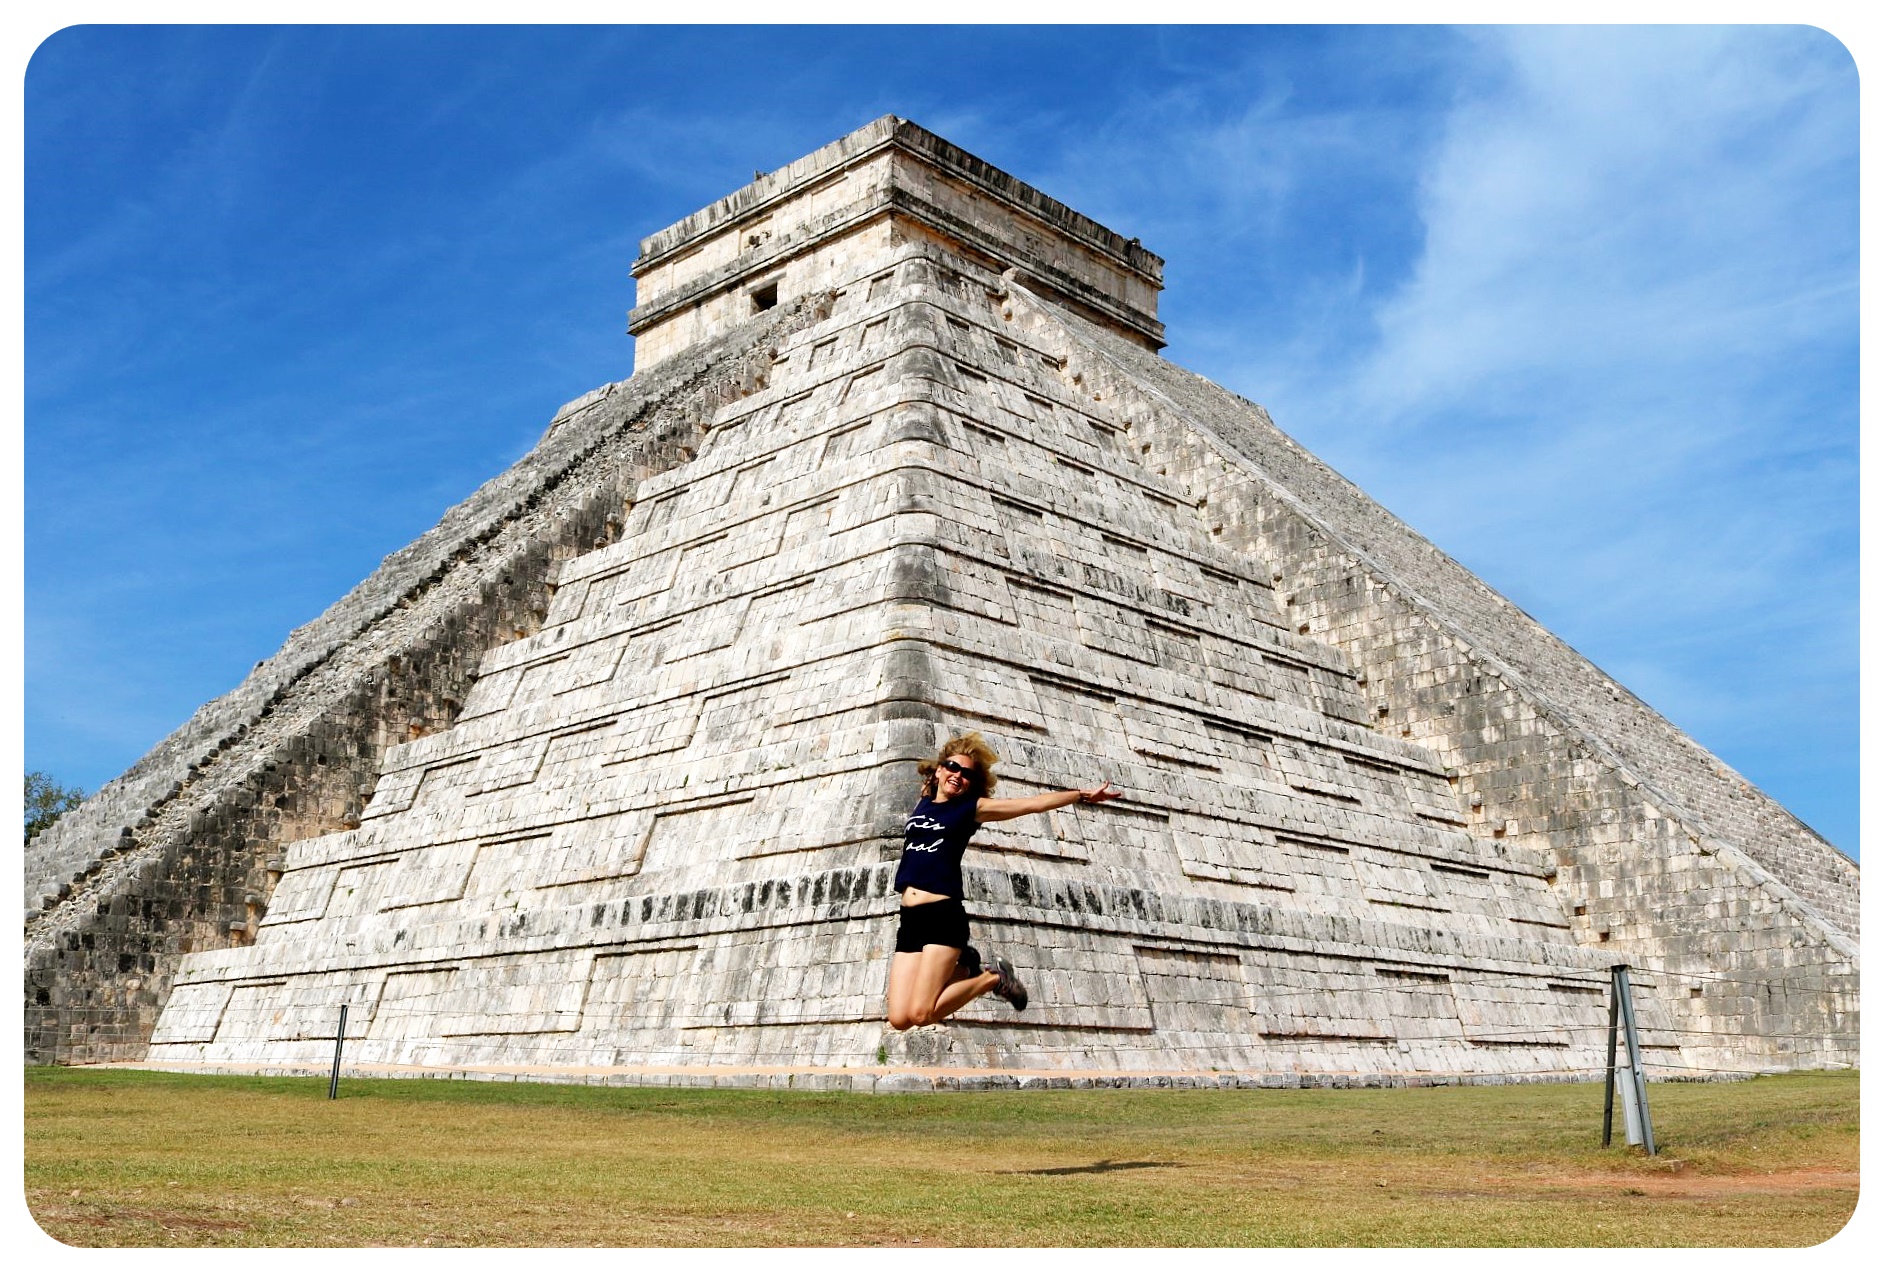 Our journey through Mexico in pictures